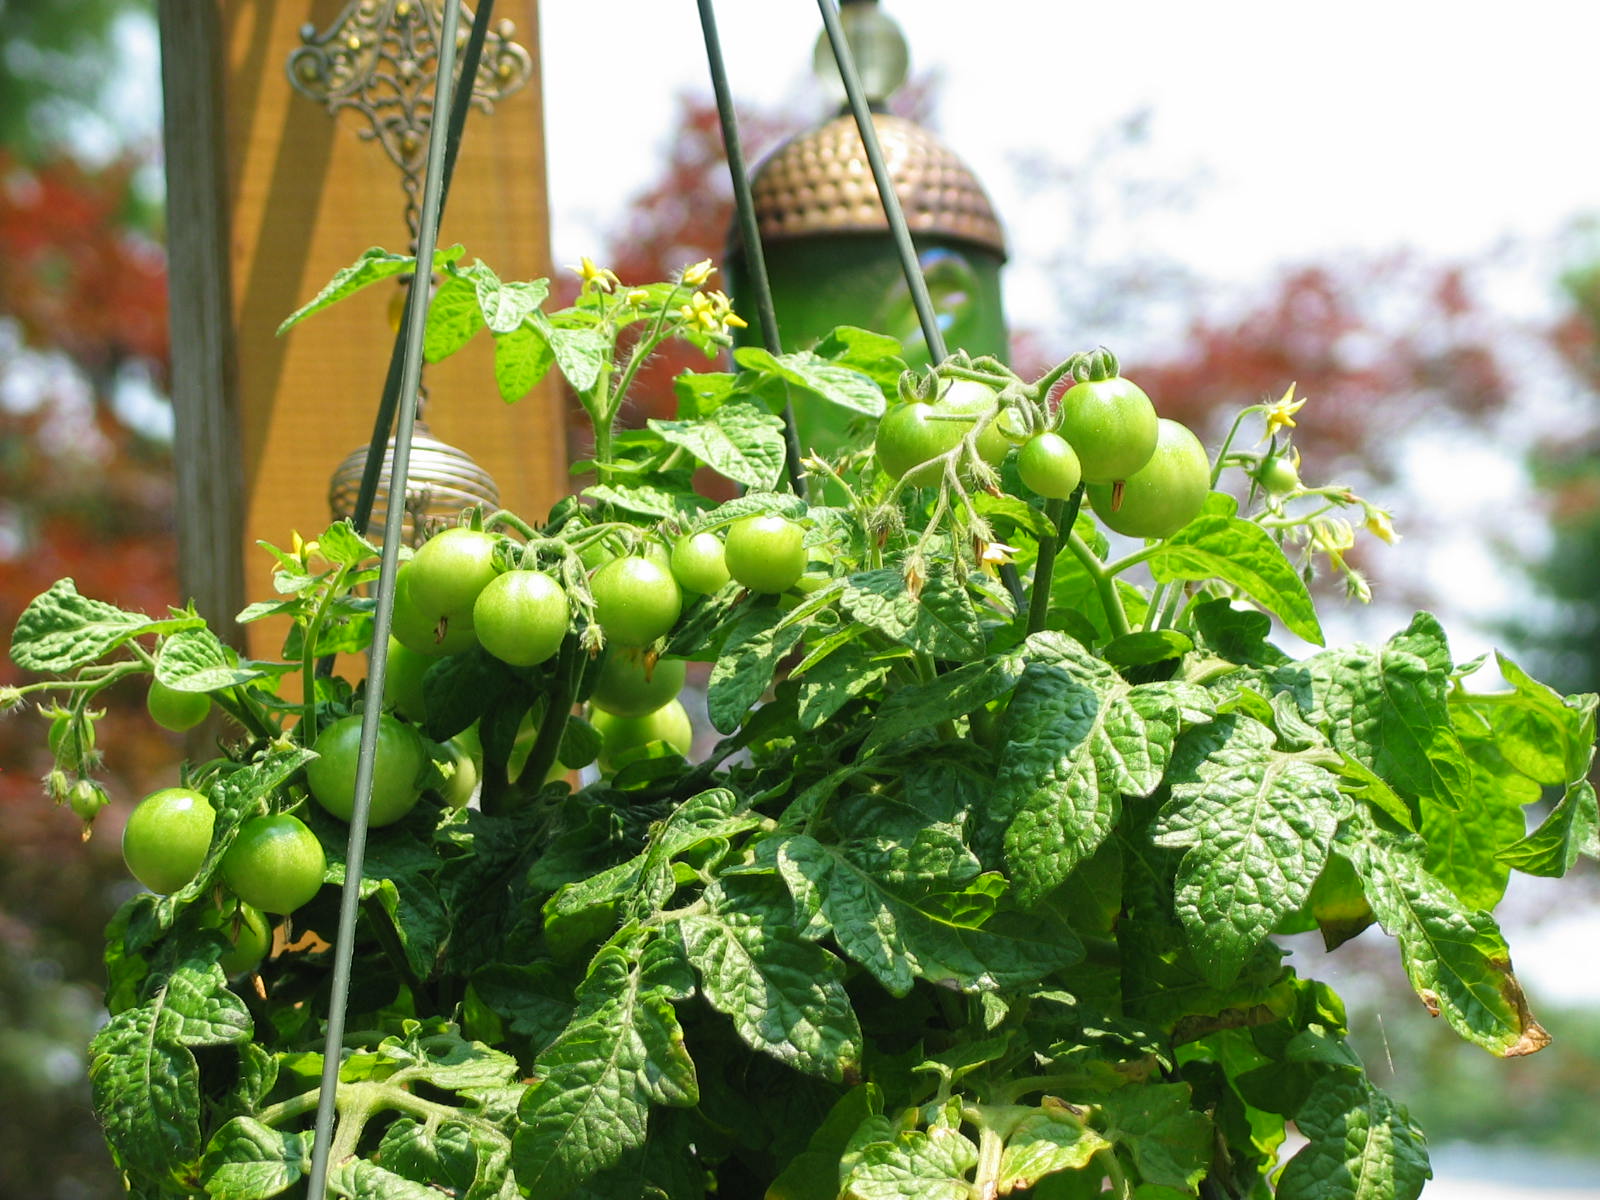 Growing Tomatoes In A Hanging Basket